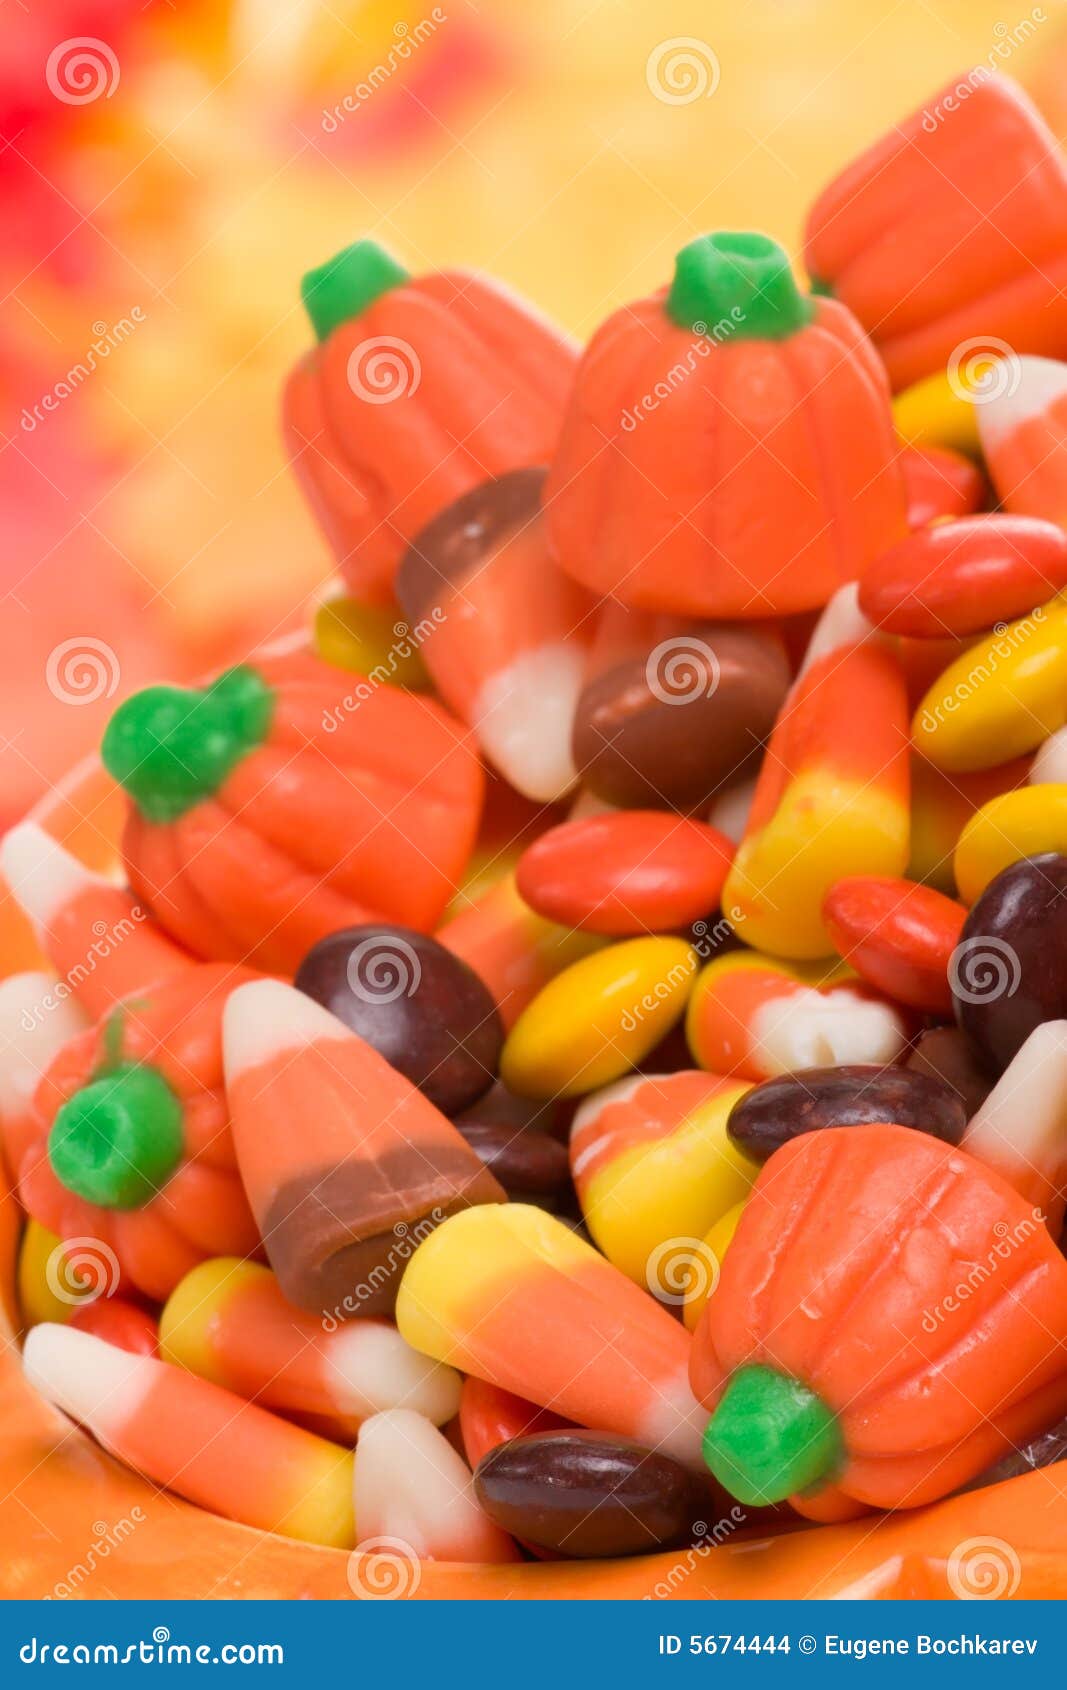 Halloween candy stock photo. Image of october, snack, candy - 5674444